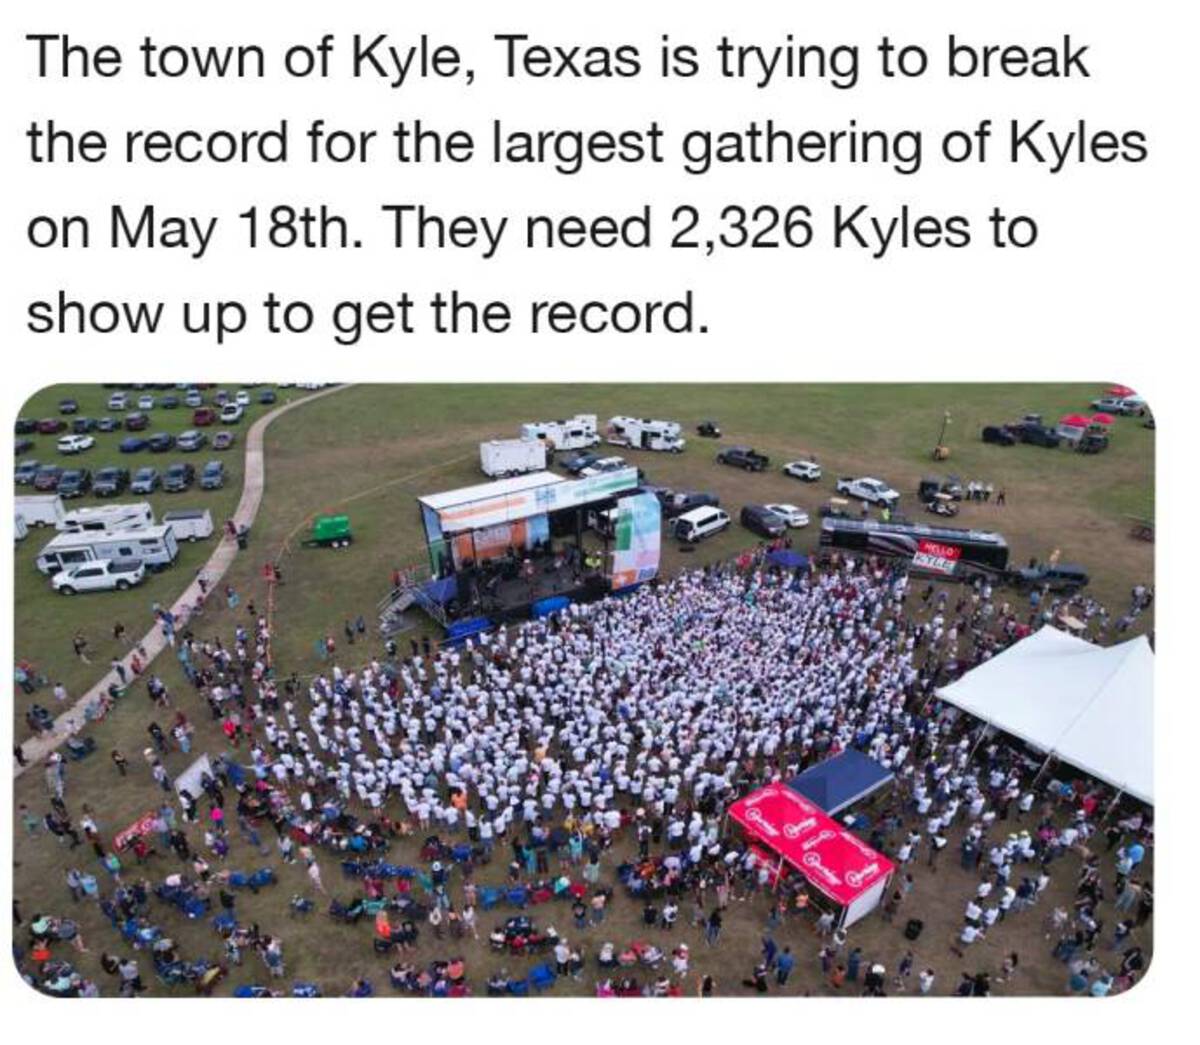 Kyle - The town of Kyle, Texas is trying to break the record for the largest gathering of Kyles on May 18th. They need 2,326 Kyles to show up to get the record. Hello Kyle